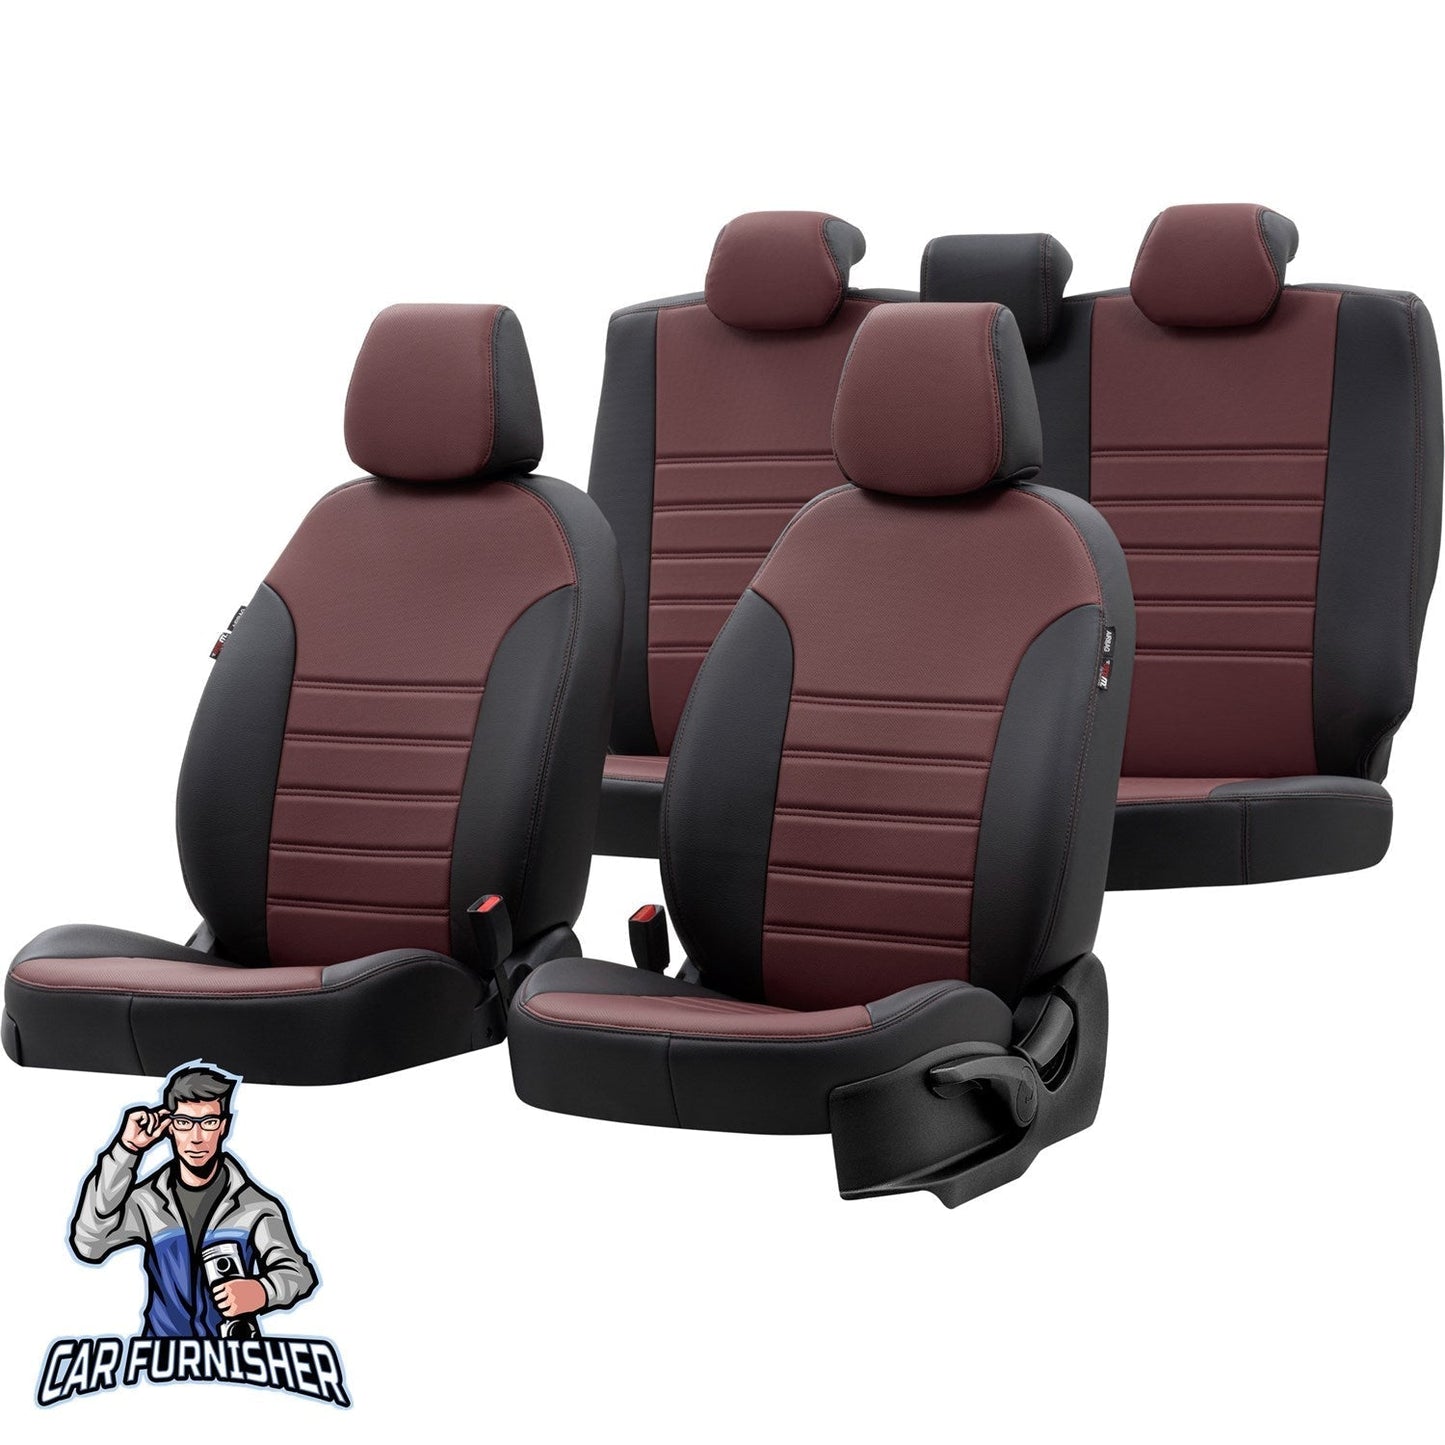 Renault 19 Seat Cover Istanbul Leather Design Burgundy Leather